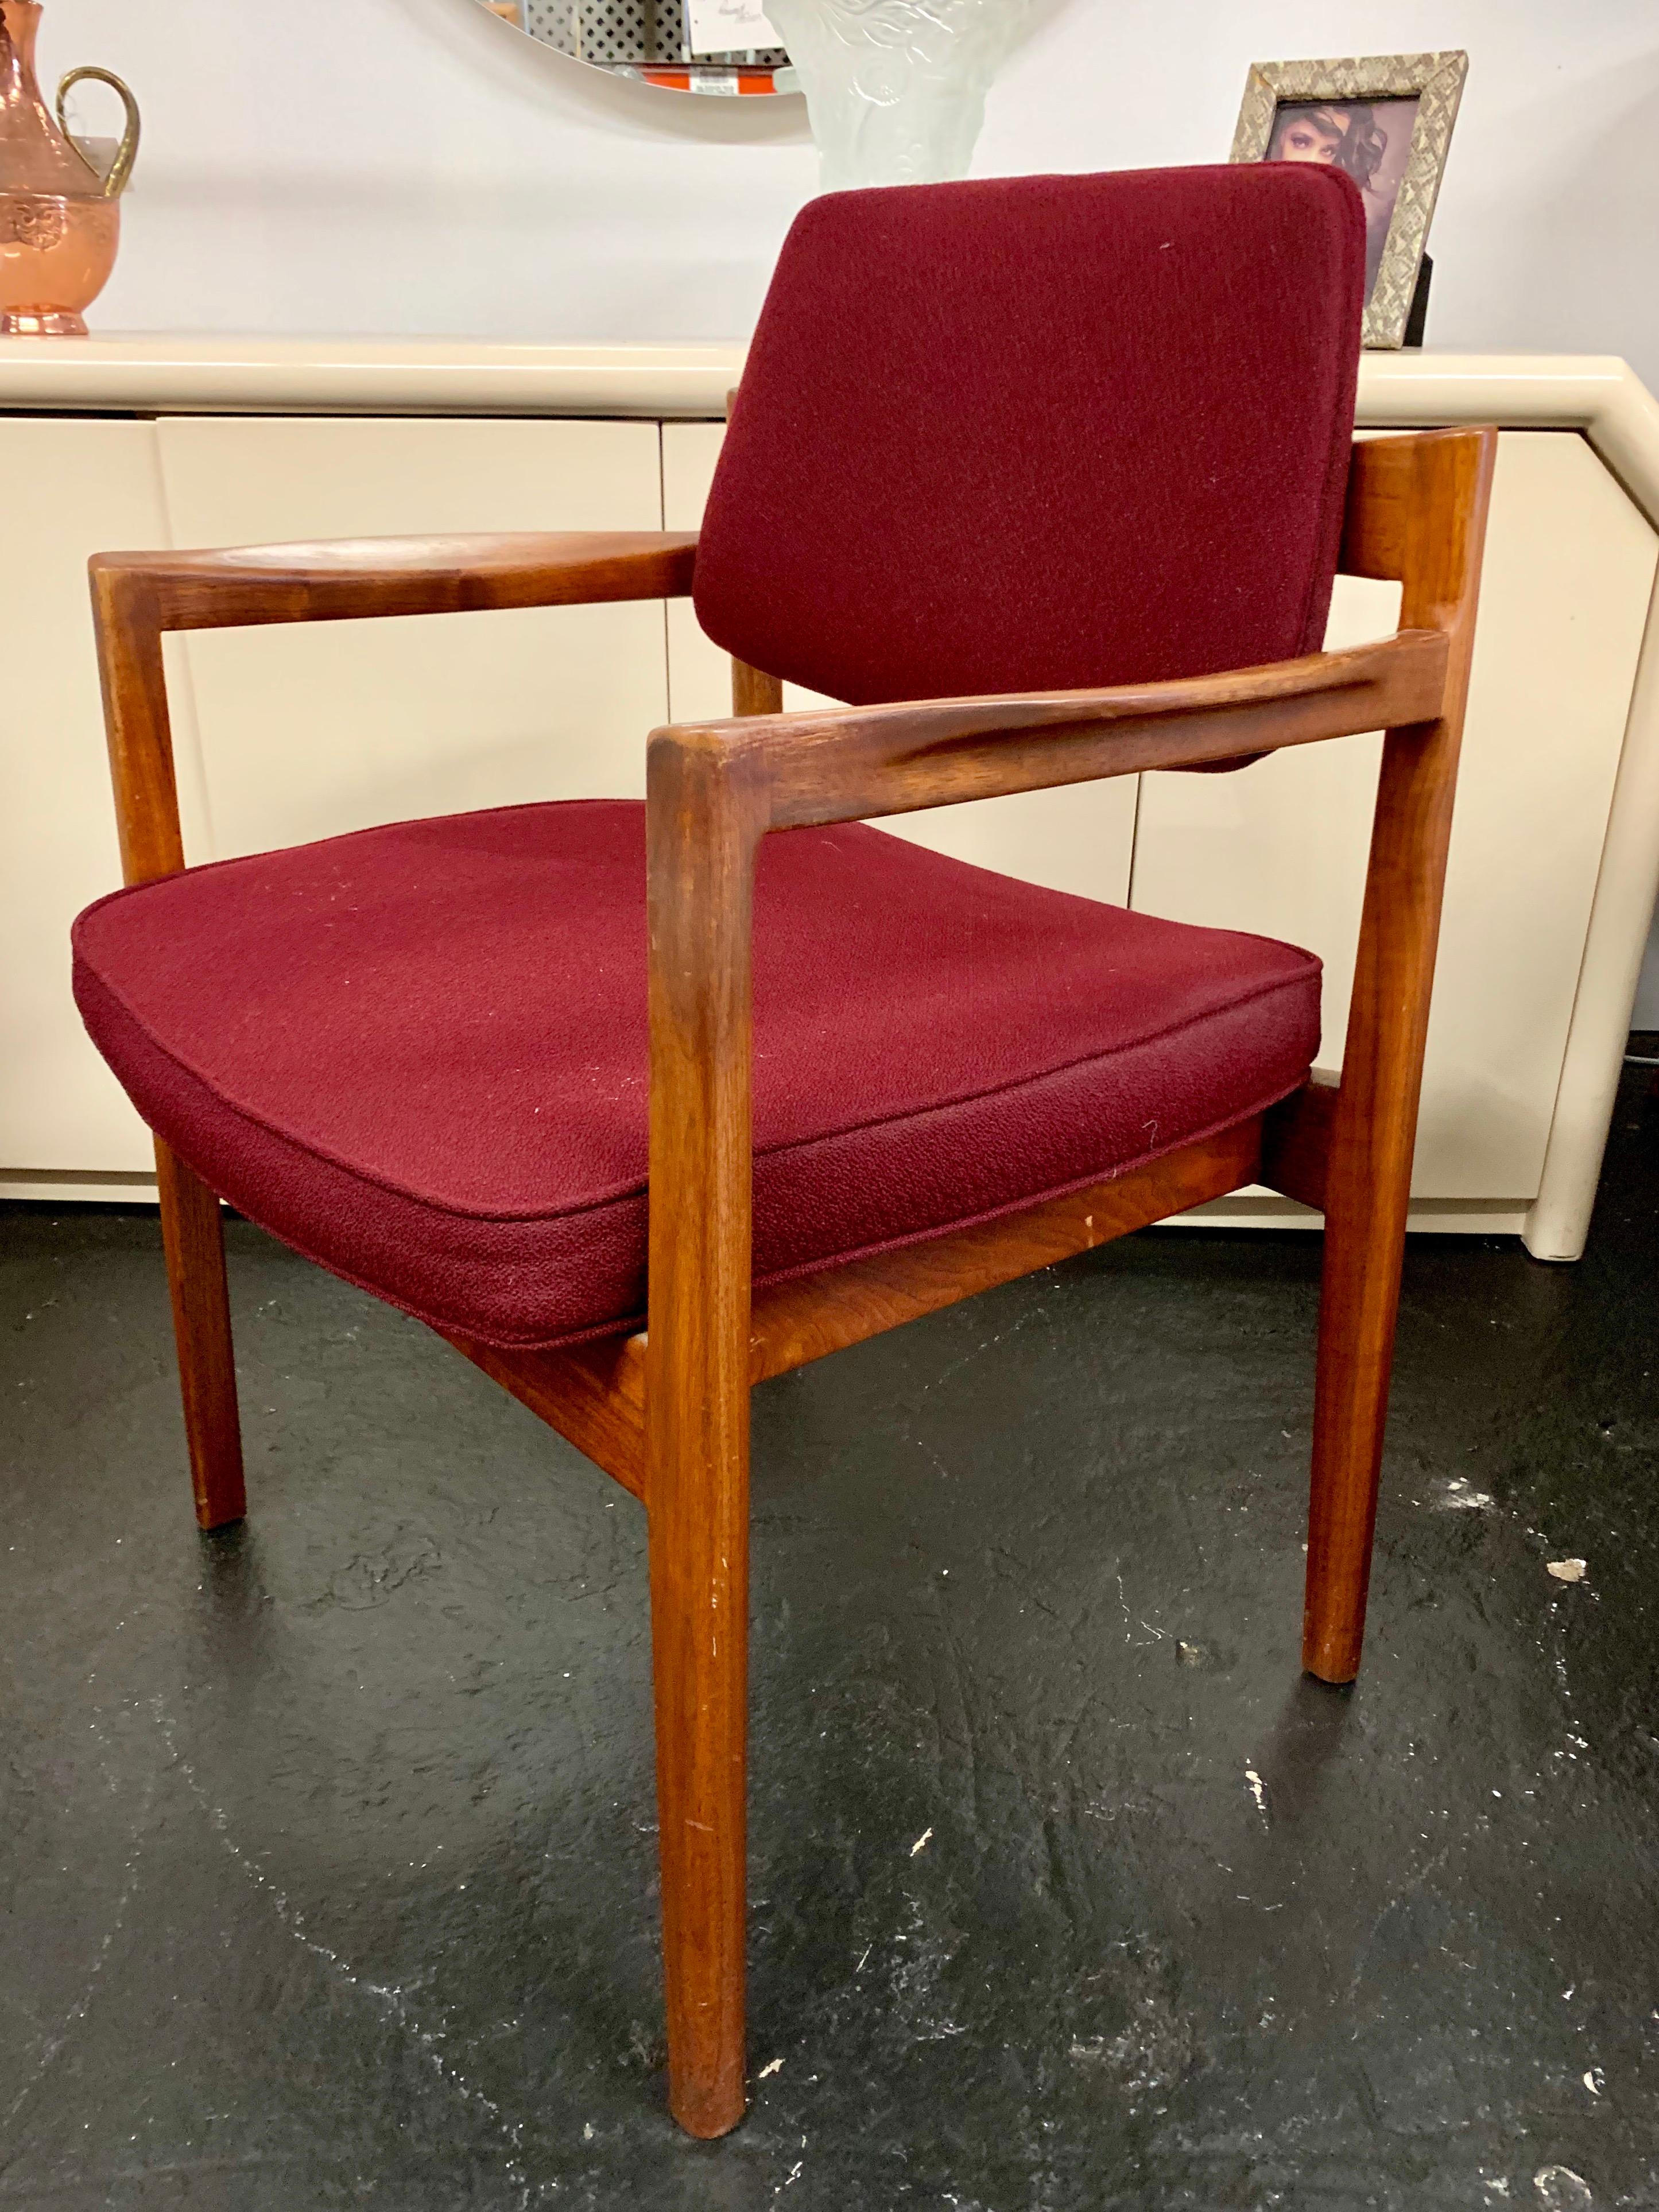 From the now closed Avon corporate building in Stamford, Connecticut, these matching armchairs
work great in a dining room, office or as accent chairs. The deep burgundy upholstery is original and still in very good condition. The walnut wood